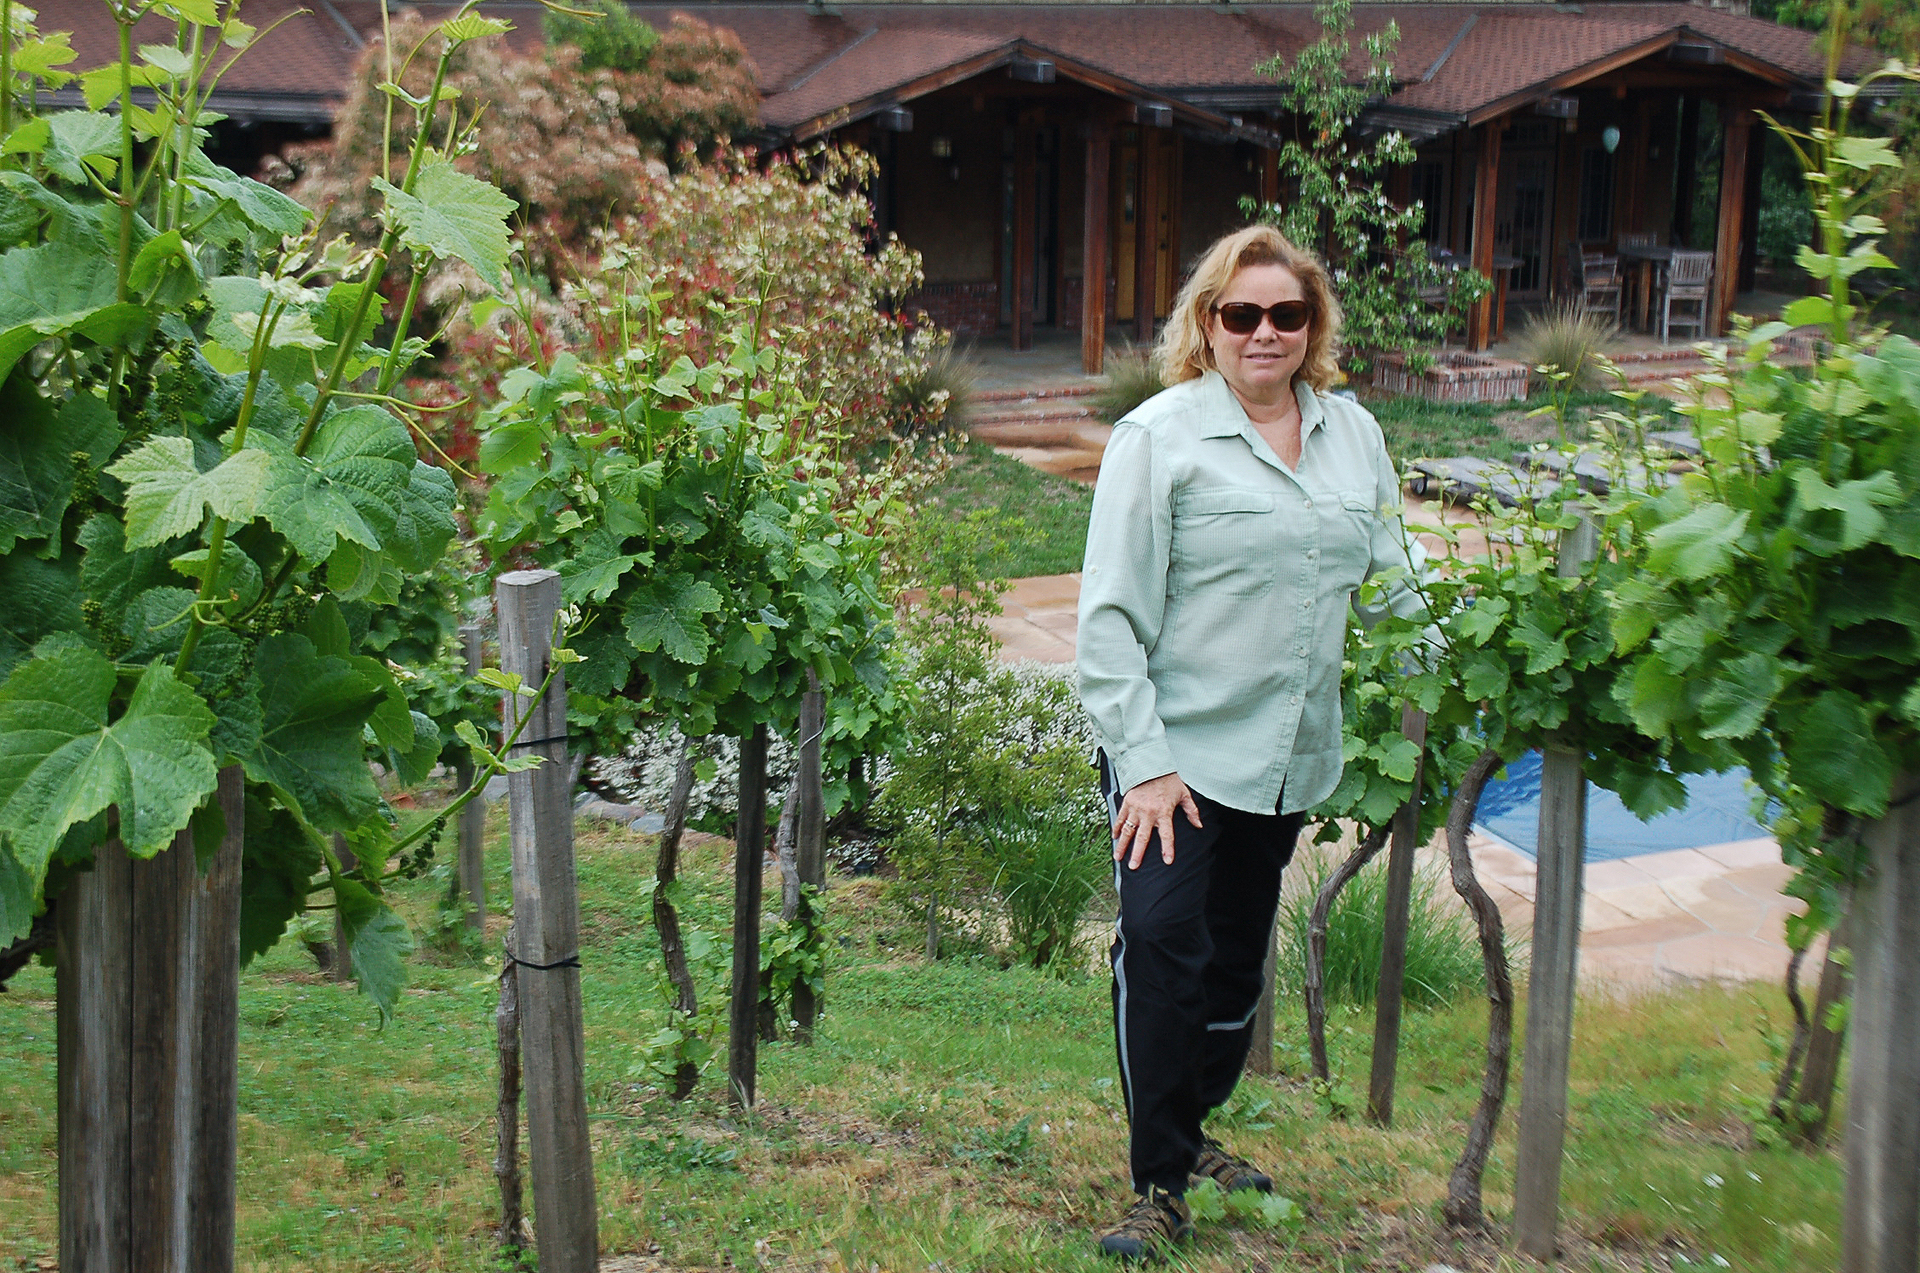 Vineyard manager/winemaker Nancy Freire specified and planted this pinot noir vineyard in a cool spot in Portola Valley, where the vines surround a large estate and pool.